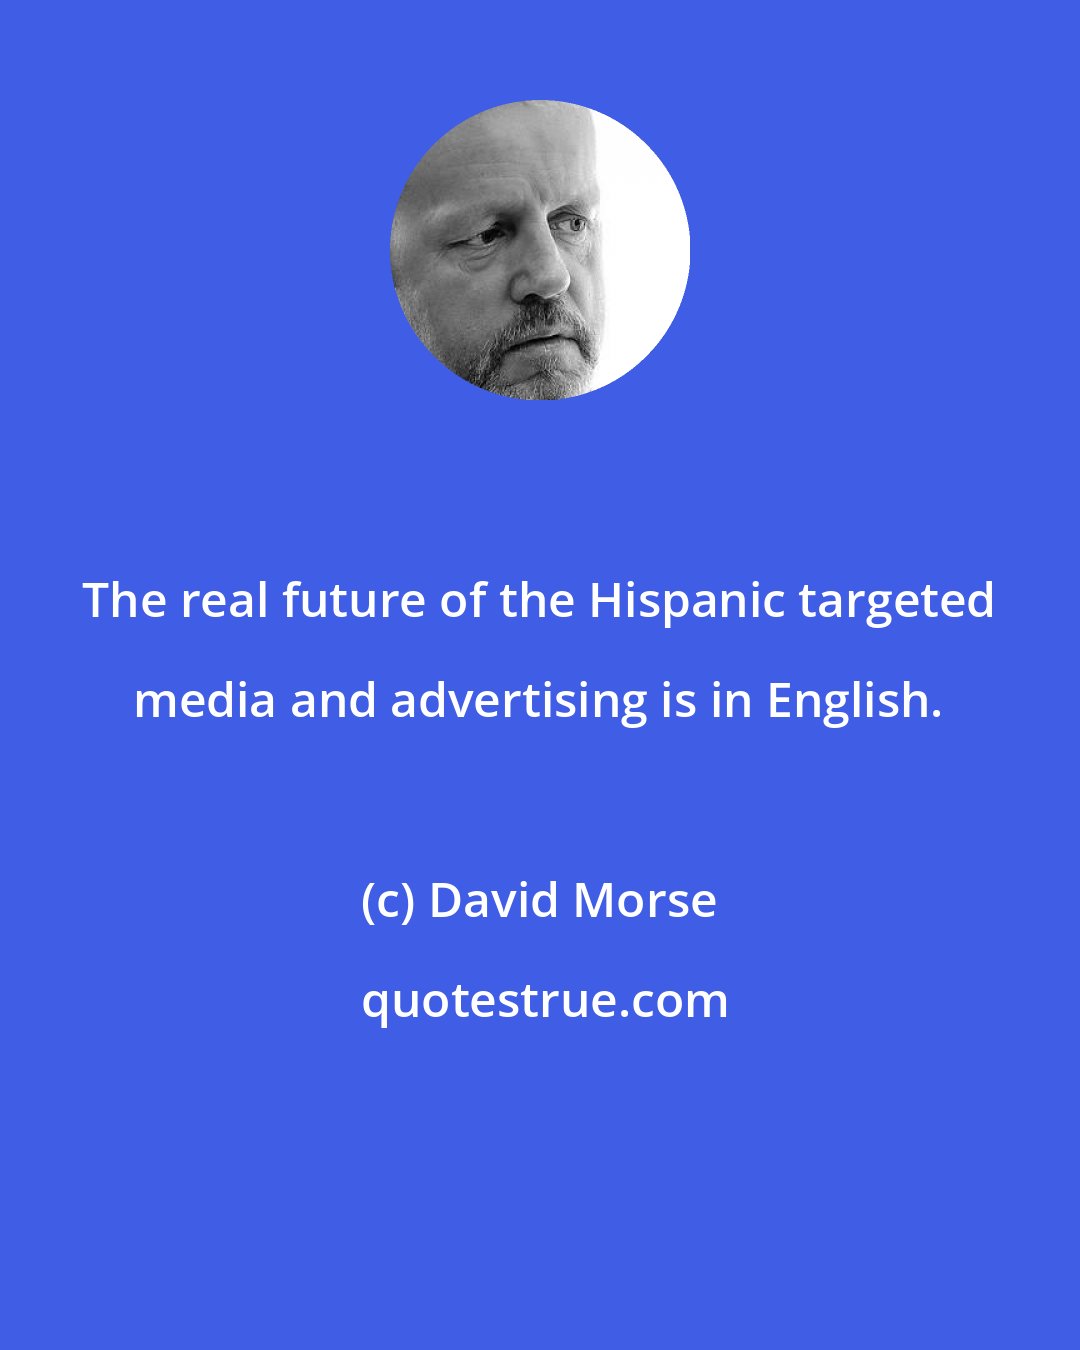 David Morse: The real future of the Hispanic targeted media and advertising is in English.